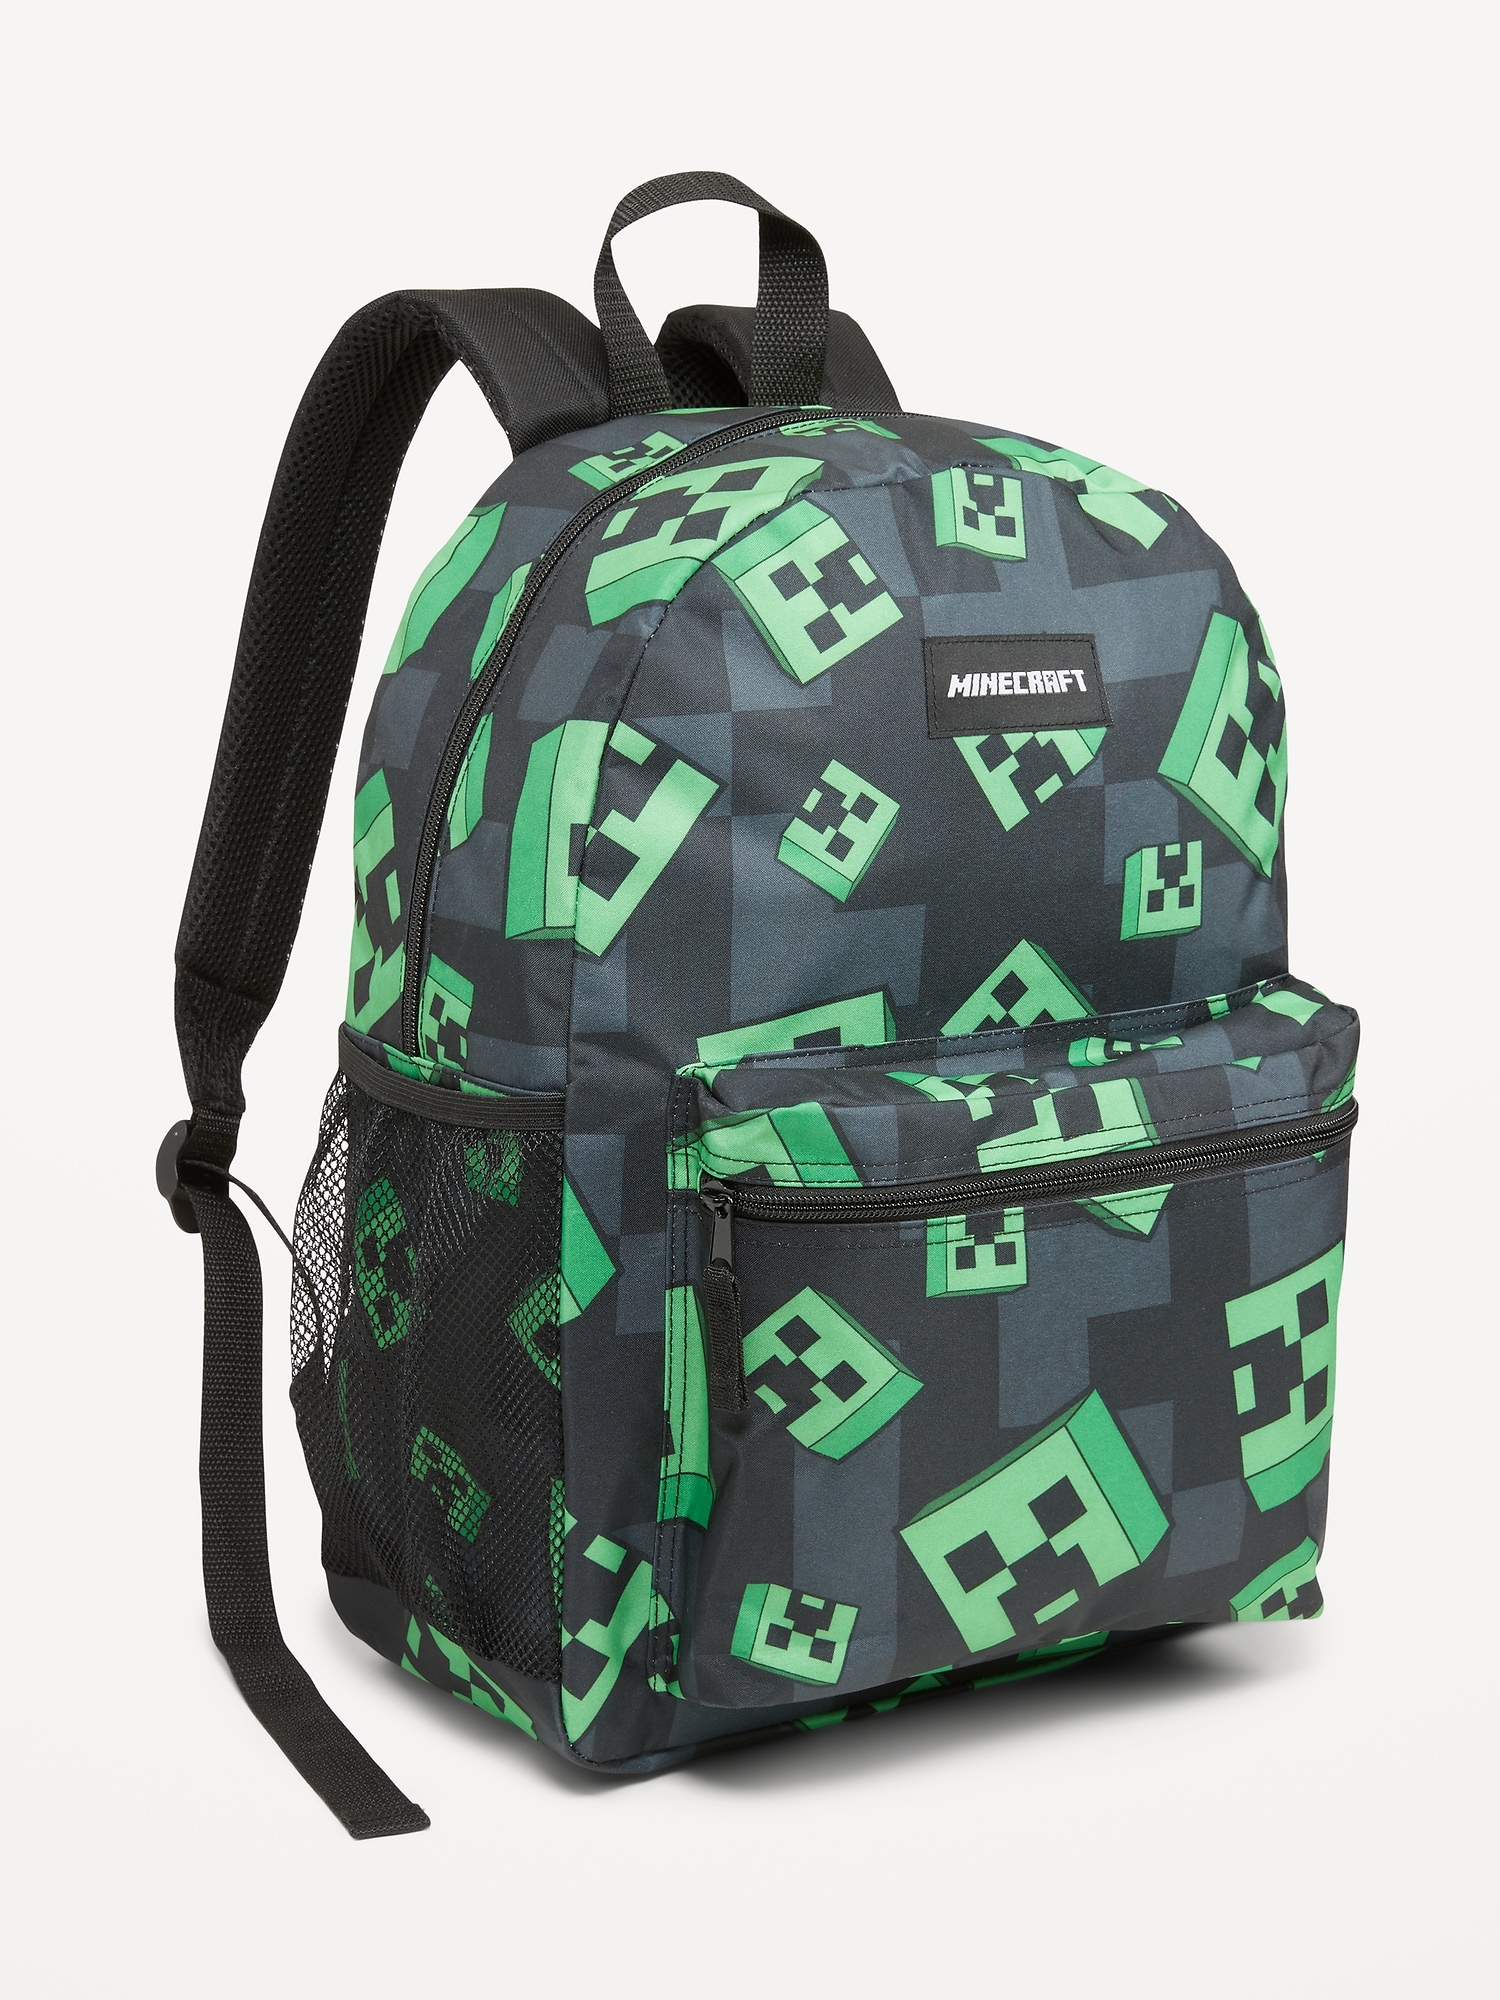 Minecraft™ Canvas Backpack for Kids